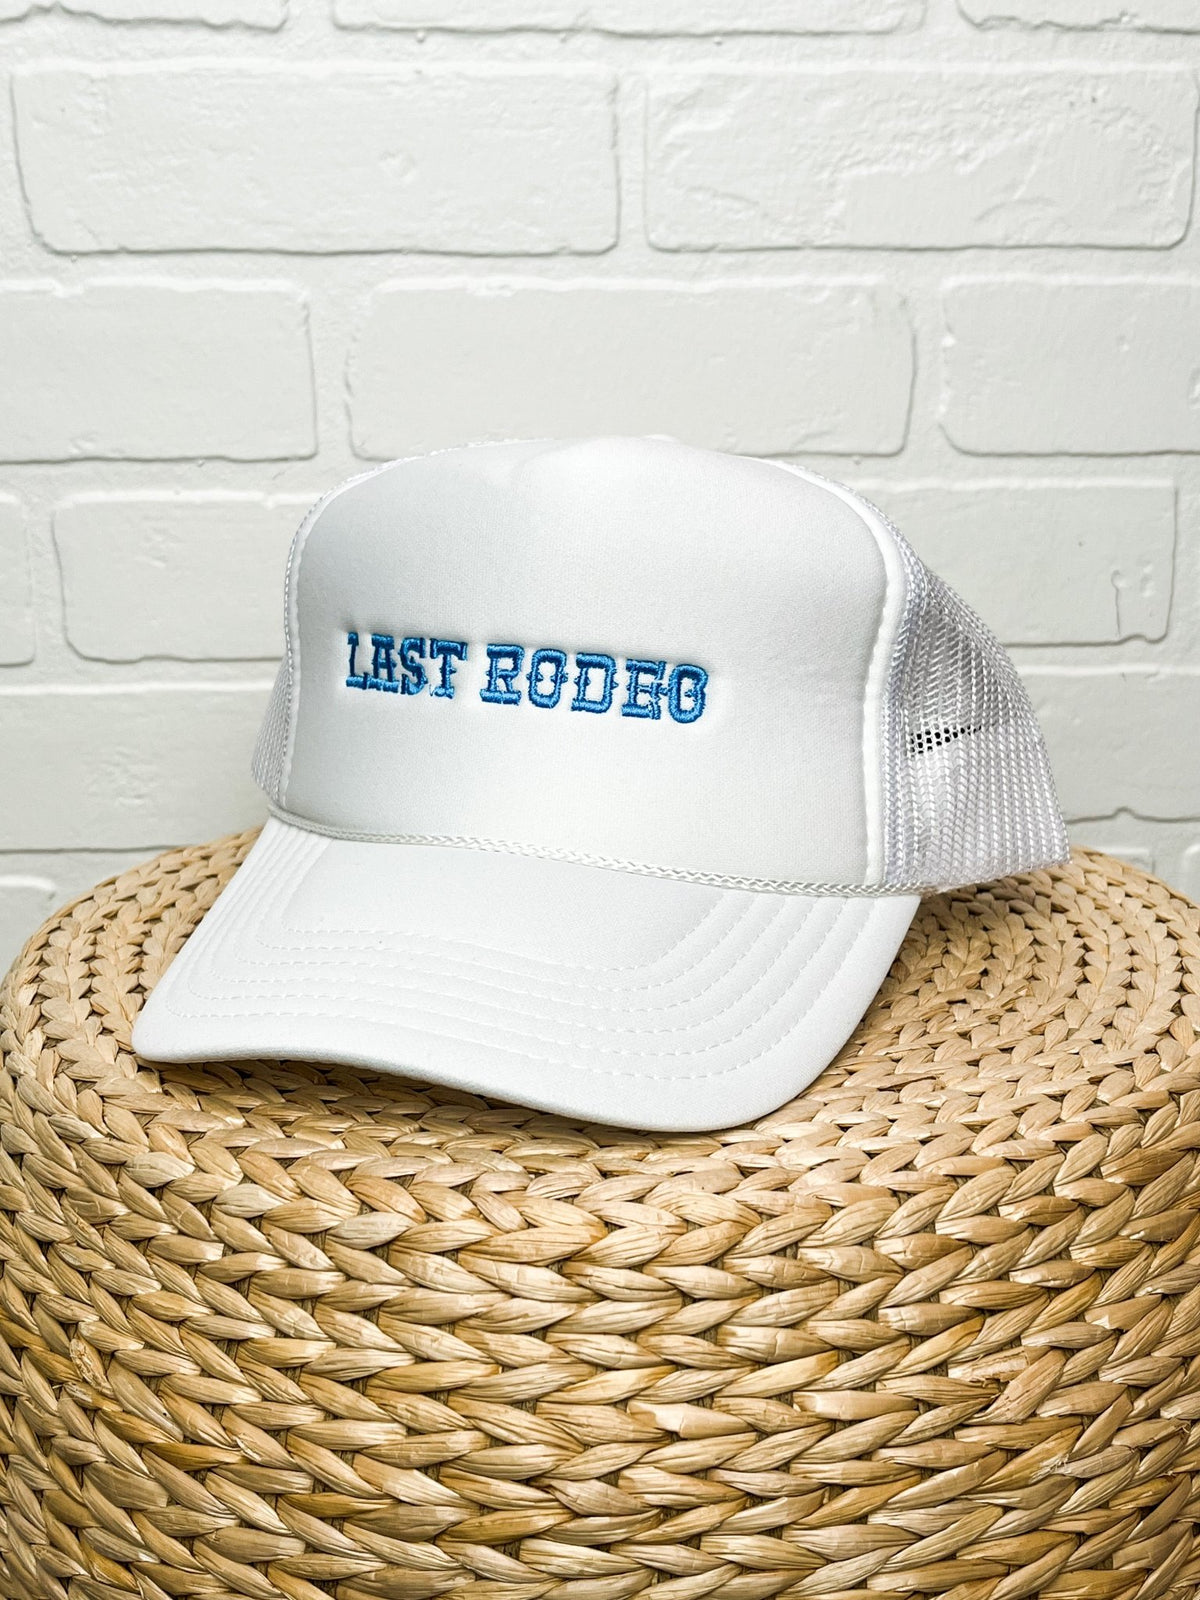 Last rodeo trucker hat white - Stylish Hat -  Cute Bridal Collection at Lush Fashion Lounge Boutique in Oklahoma City